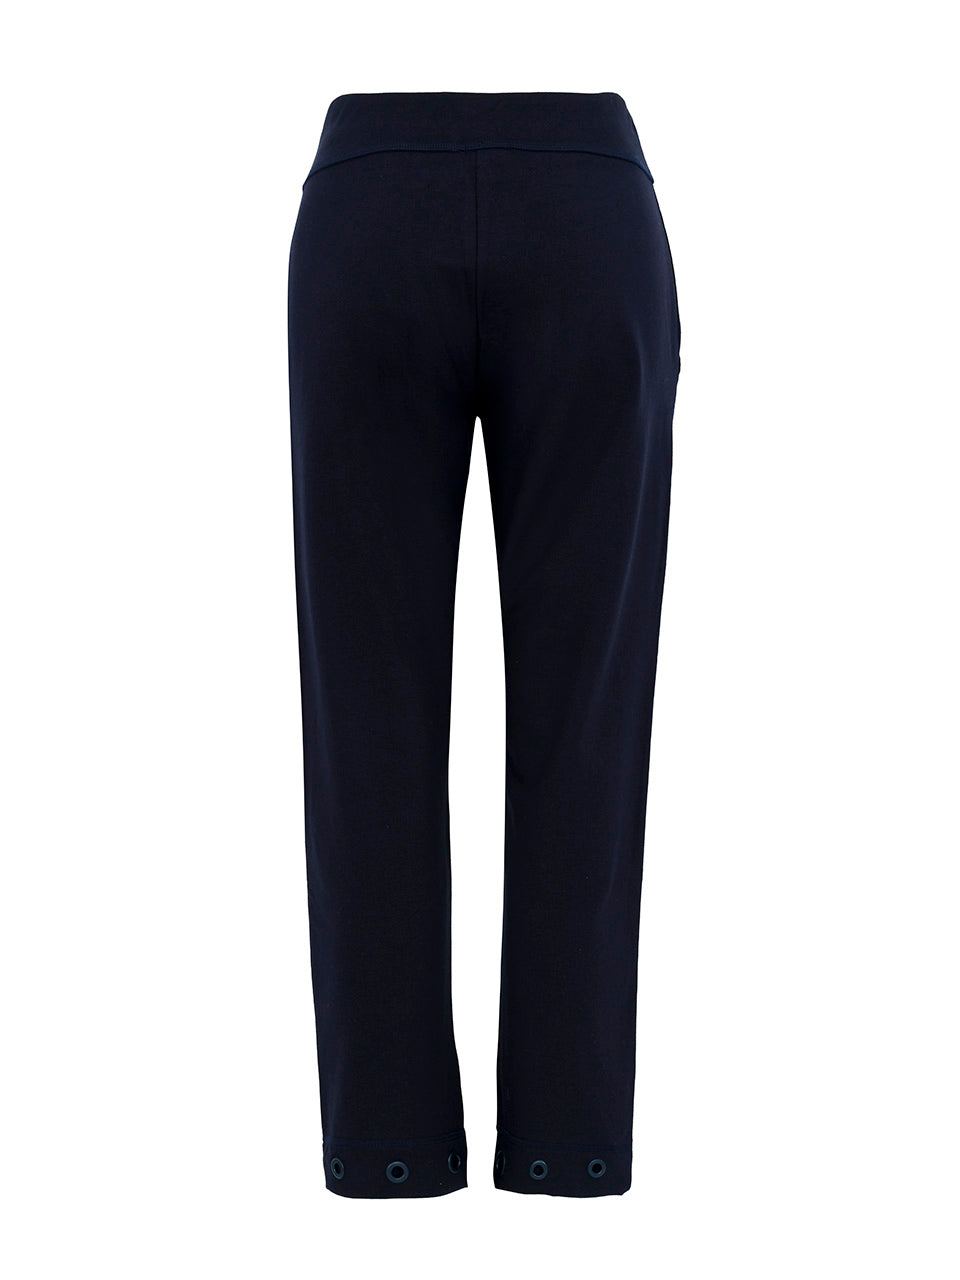 LOVE SAILING CROP PANT WITH GROMMETS